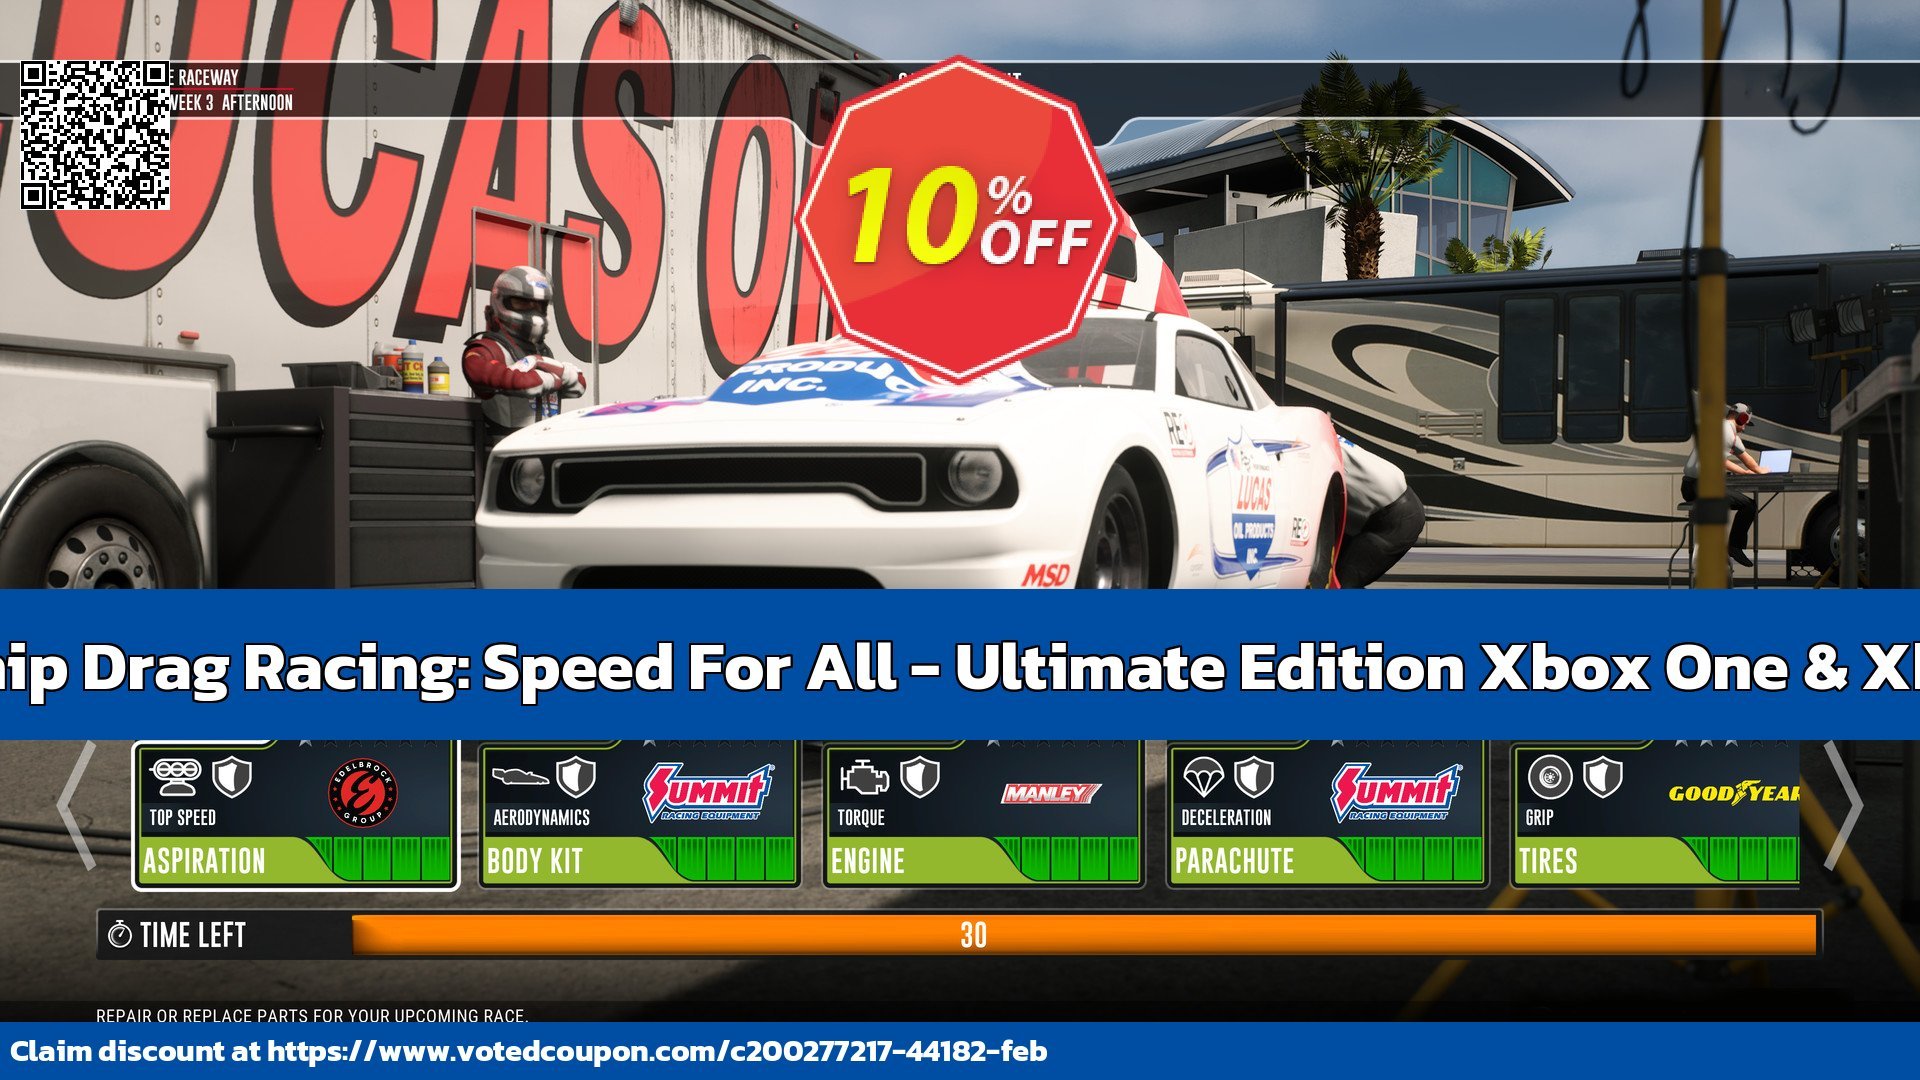 NHRA Championship Drag Racing: Speed For All - Ultimate Edition Xbox One & Xbox Series X|S, US  voted-on promotion codes